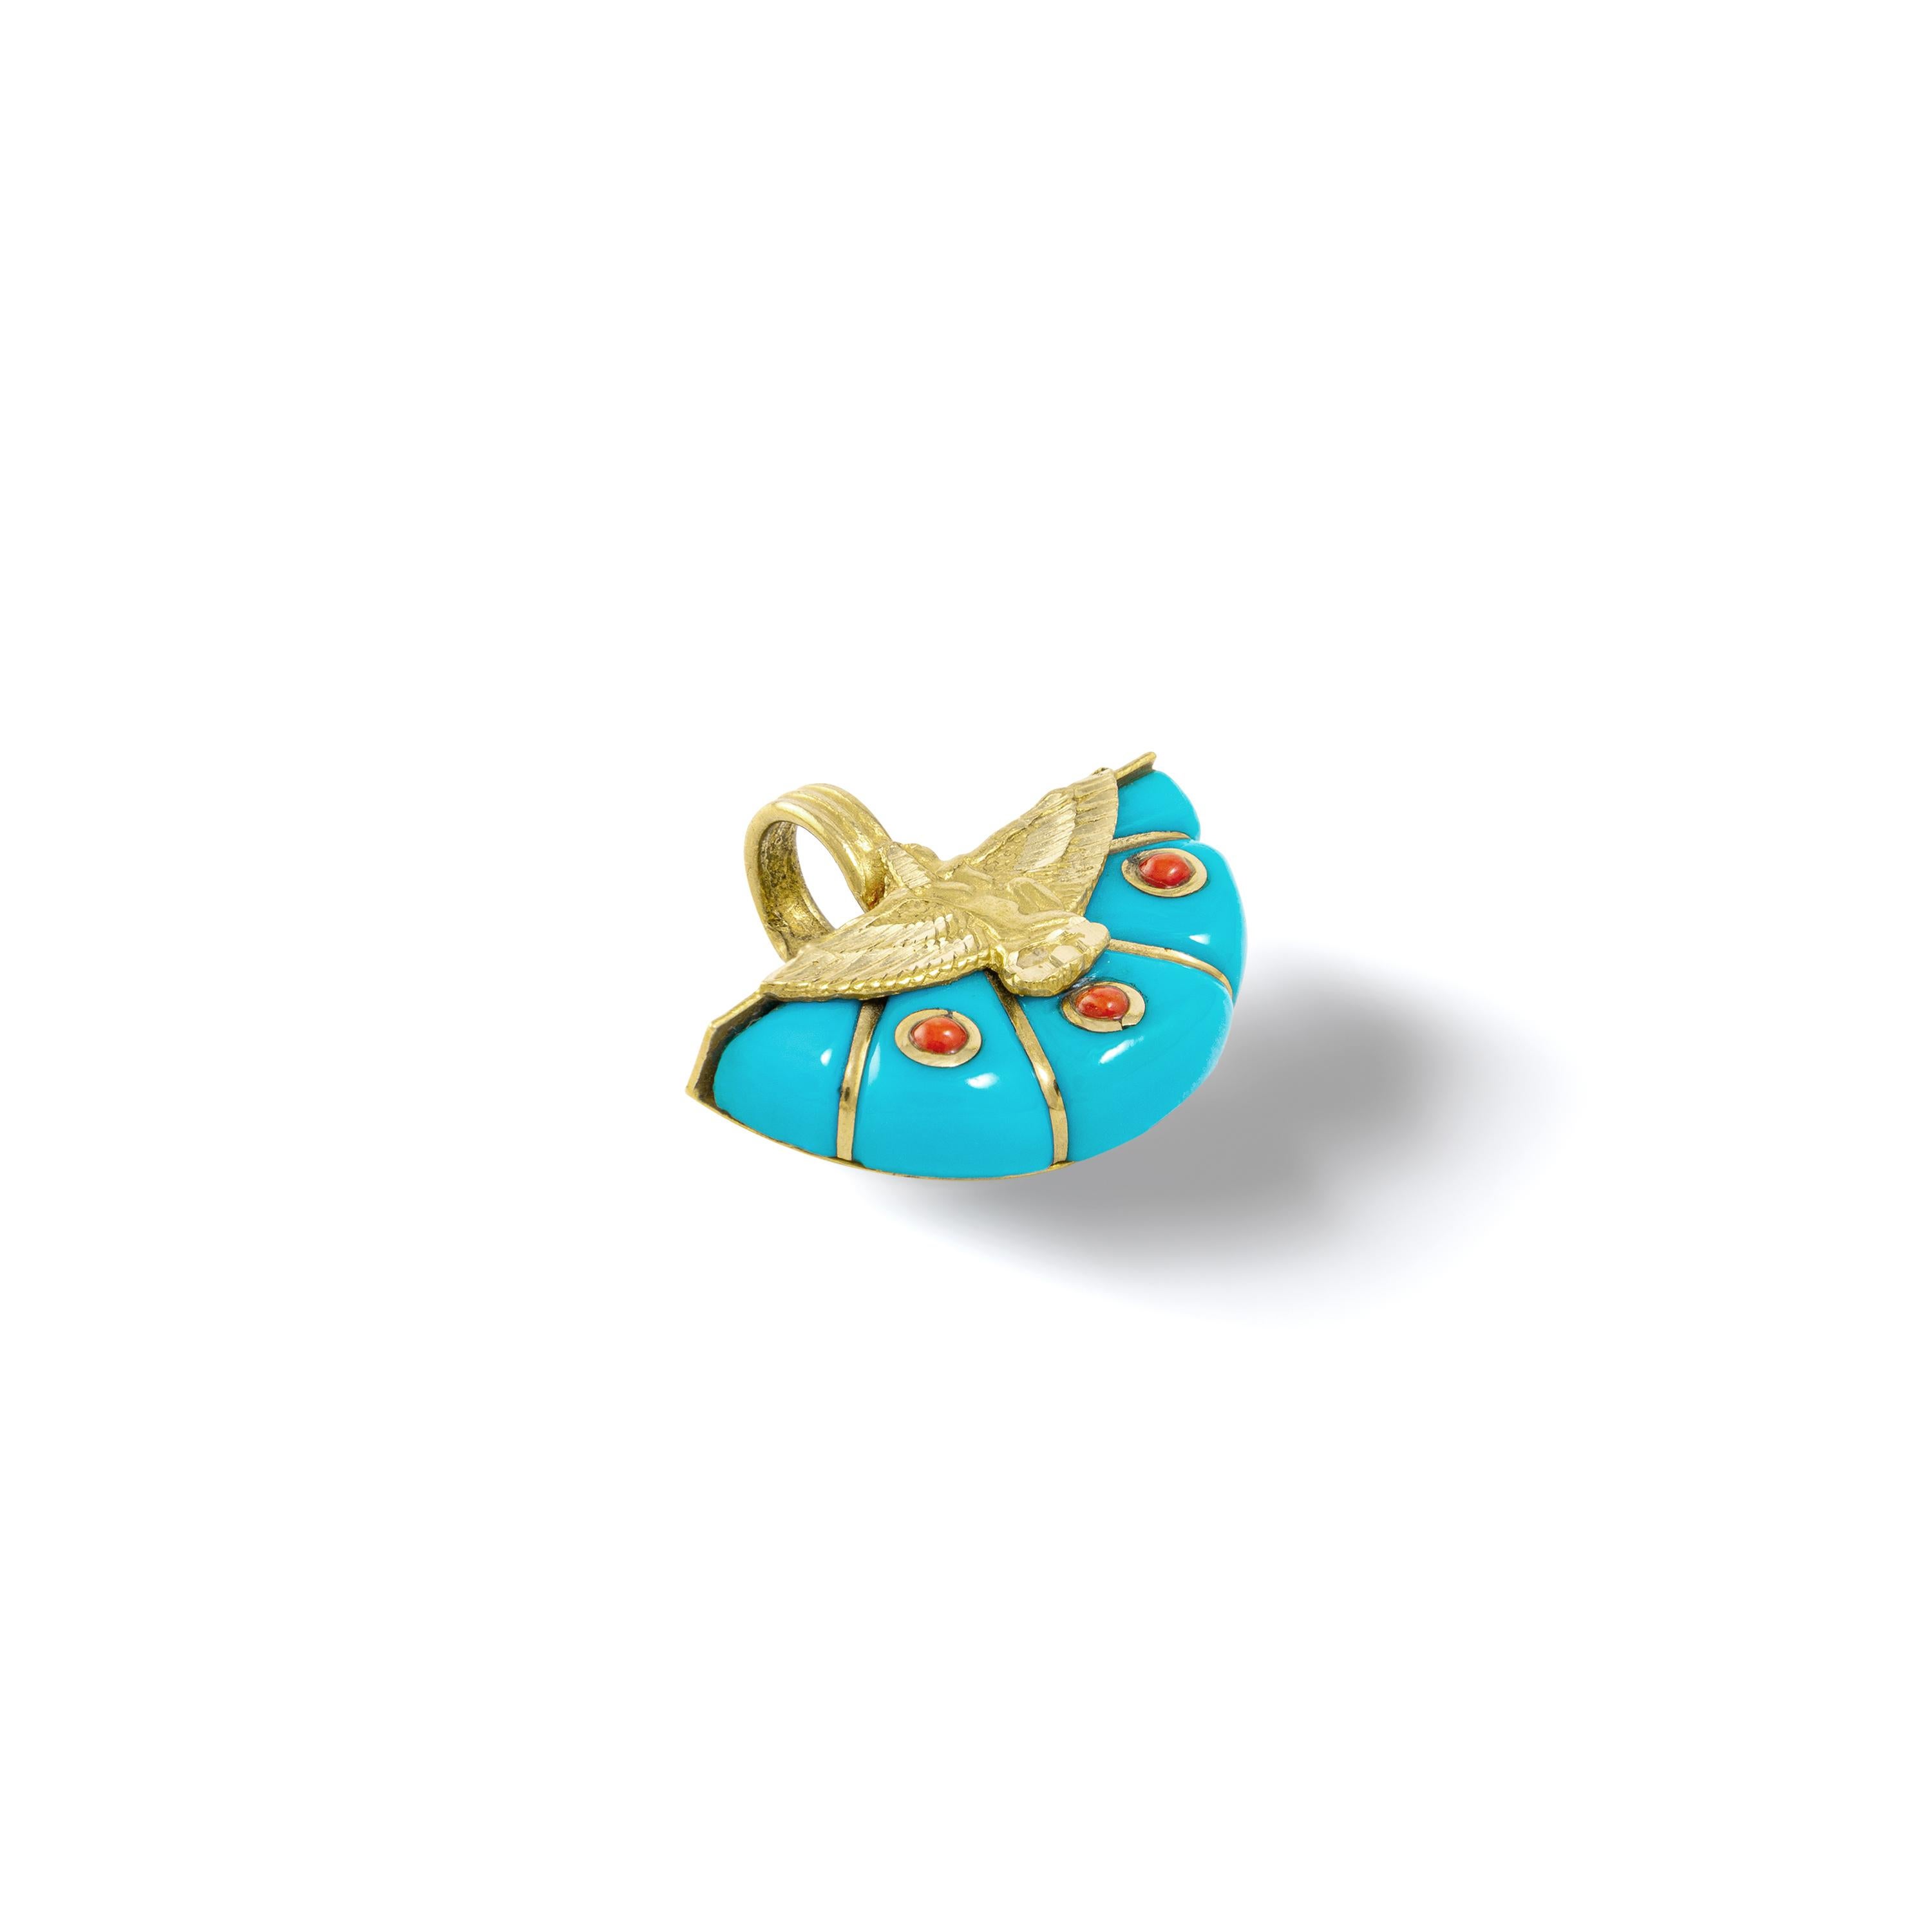 Eagle Turquoise Gold 18k Pendant Charm. Hieroglyphic inscriptions.
Egyptian revival.

Total height: 0.67 inch (1.70 centimeters) including bail.
Total width: 0.79 inch (2.00 centimeters).